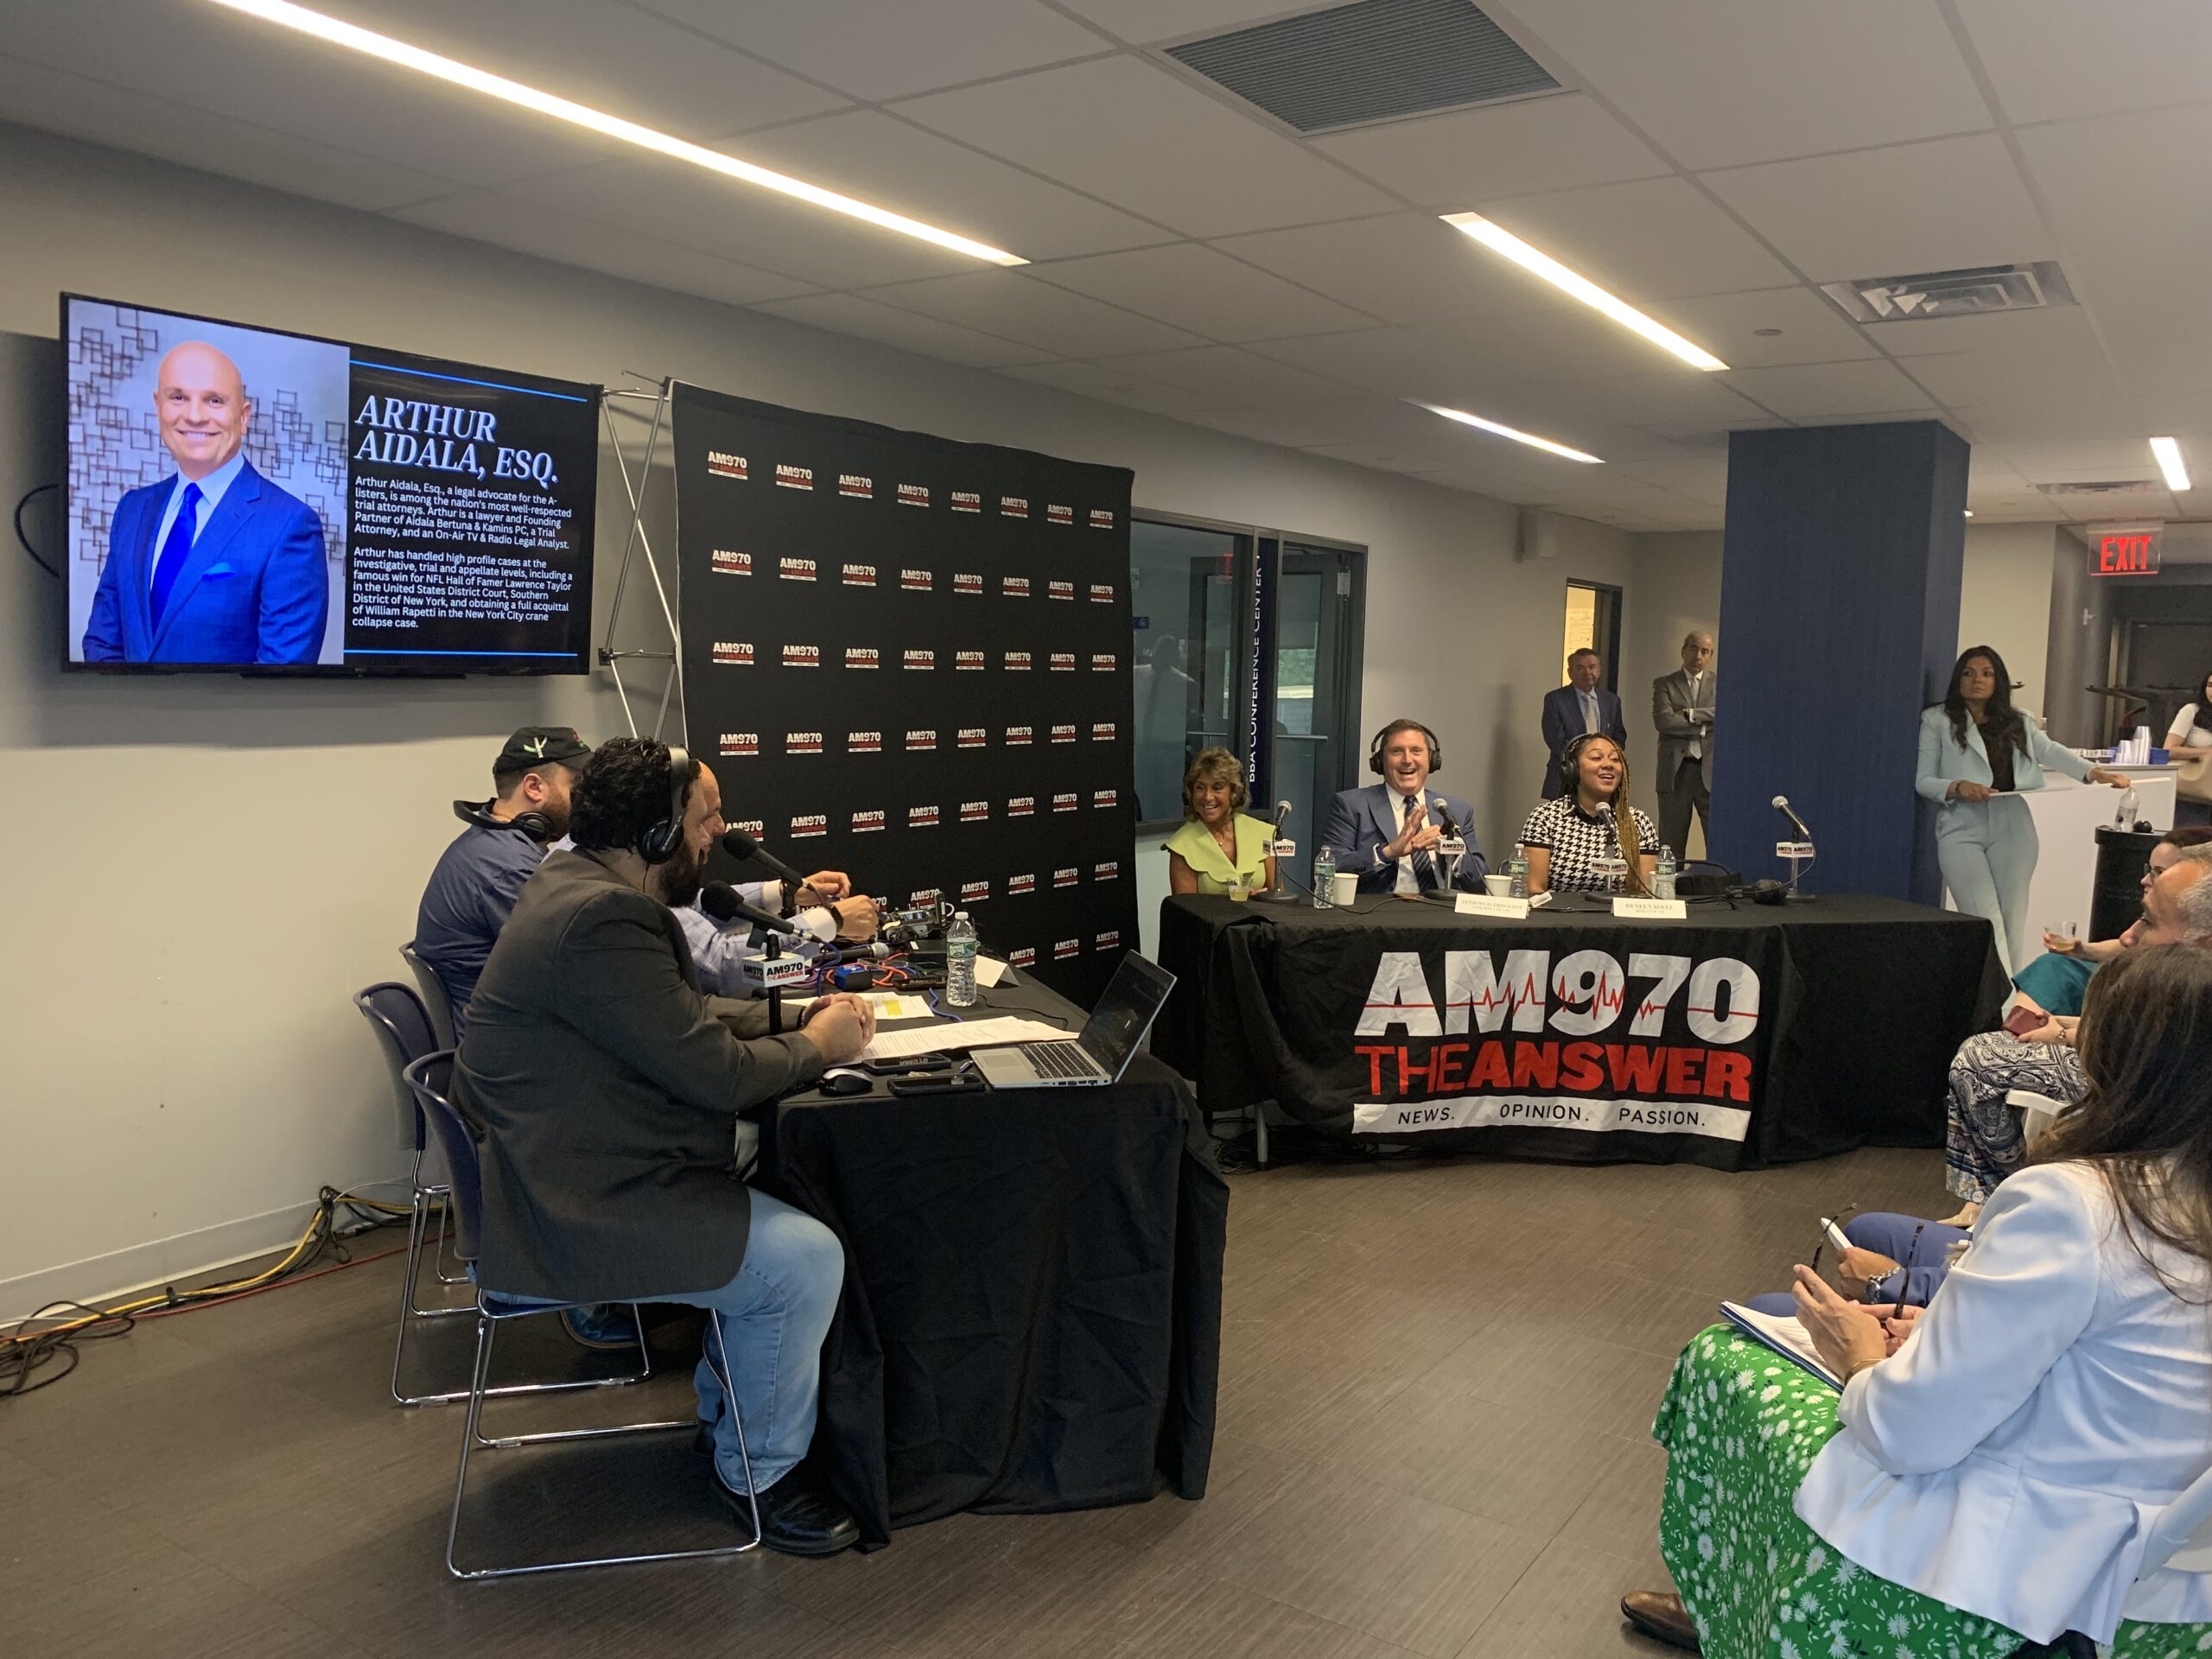 two black tables sit before a black backdrop with "AM970" written in white in a grid pattern. A tablecloth on the table to the right reads "AM970, THE ANSWER, NEWS. OPINION. PASSION." Six people sit at the tables, some wearing headphones.